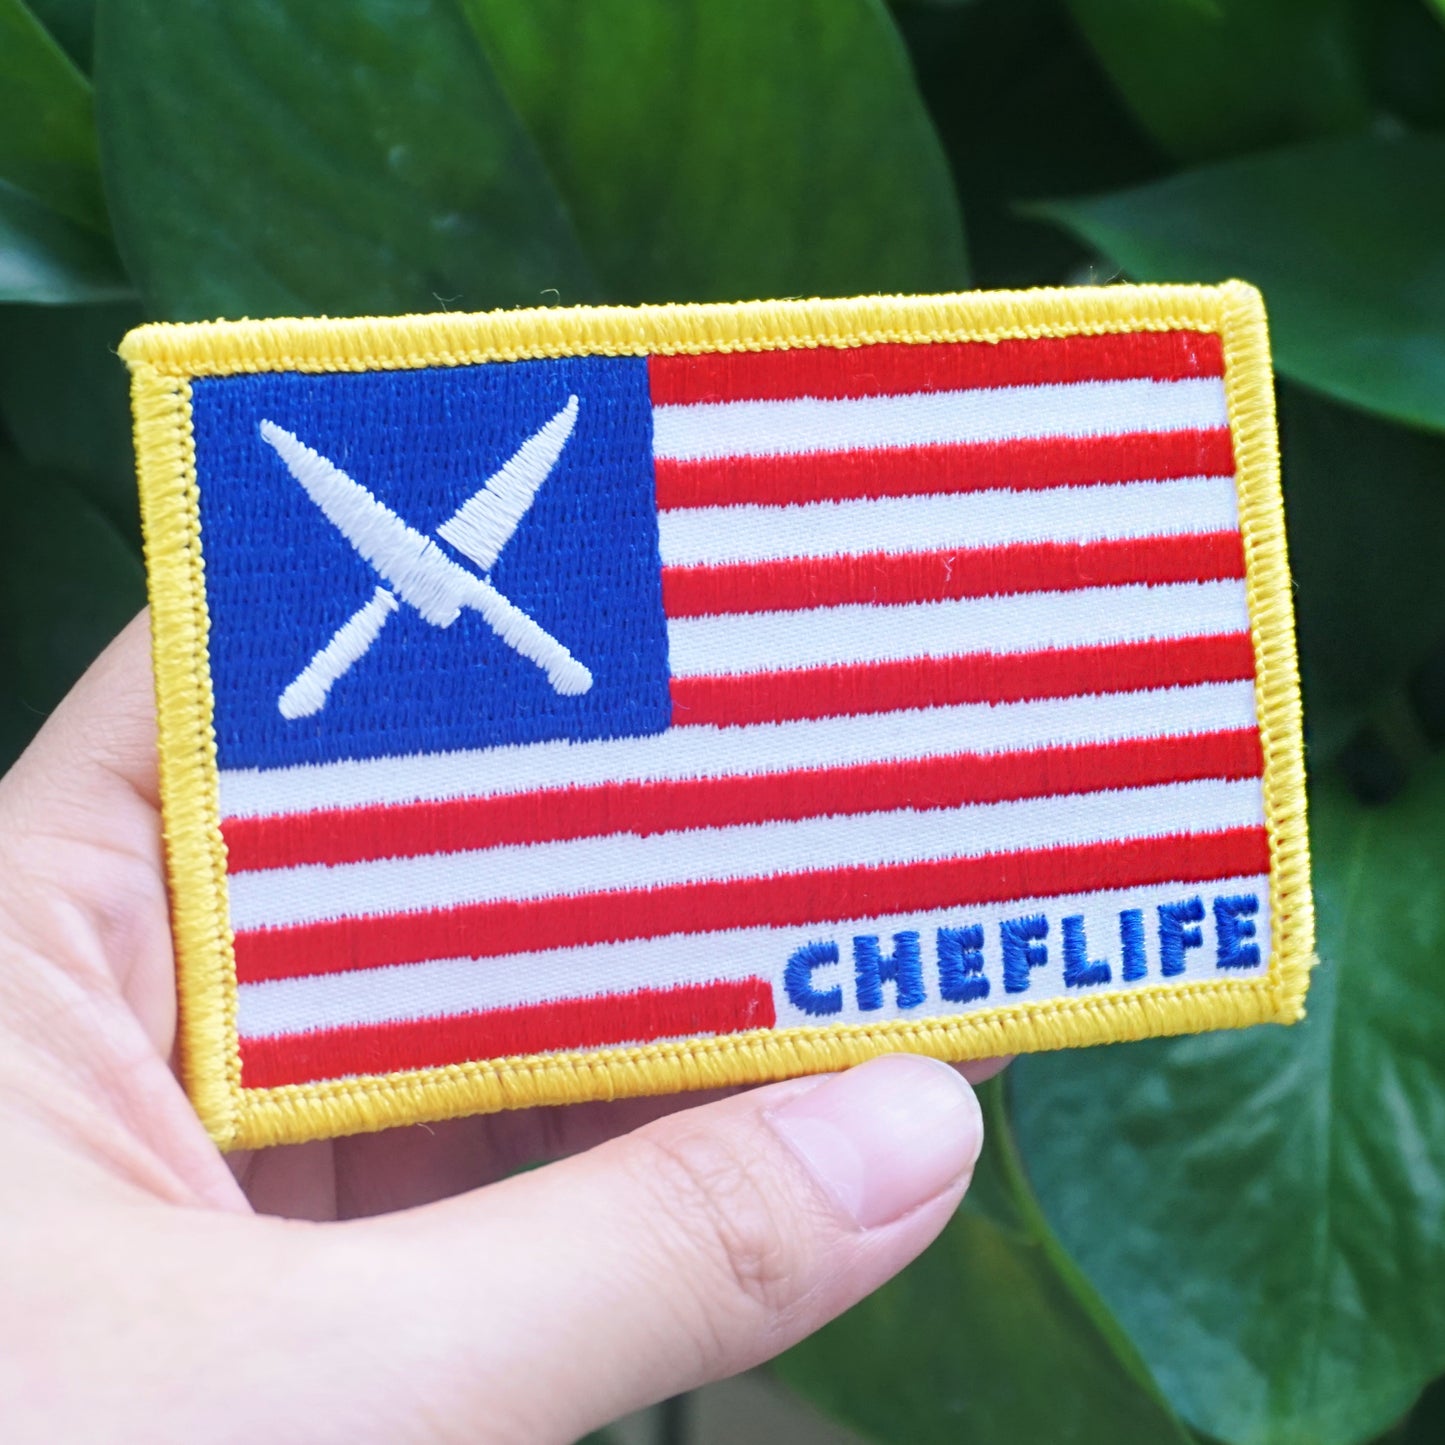 Custom Embroidery Patch